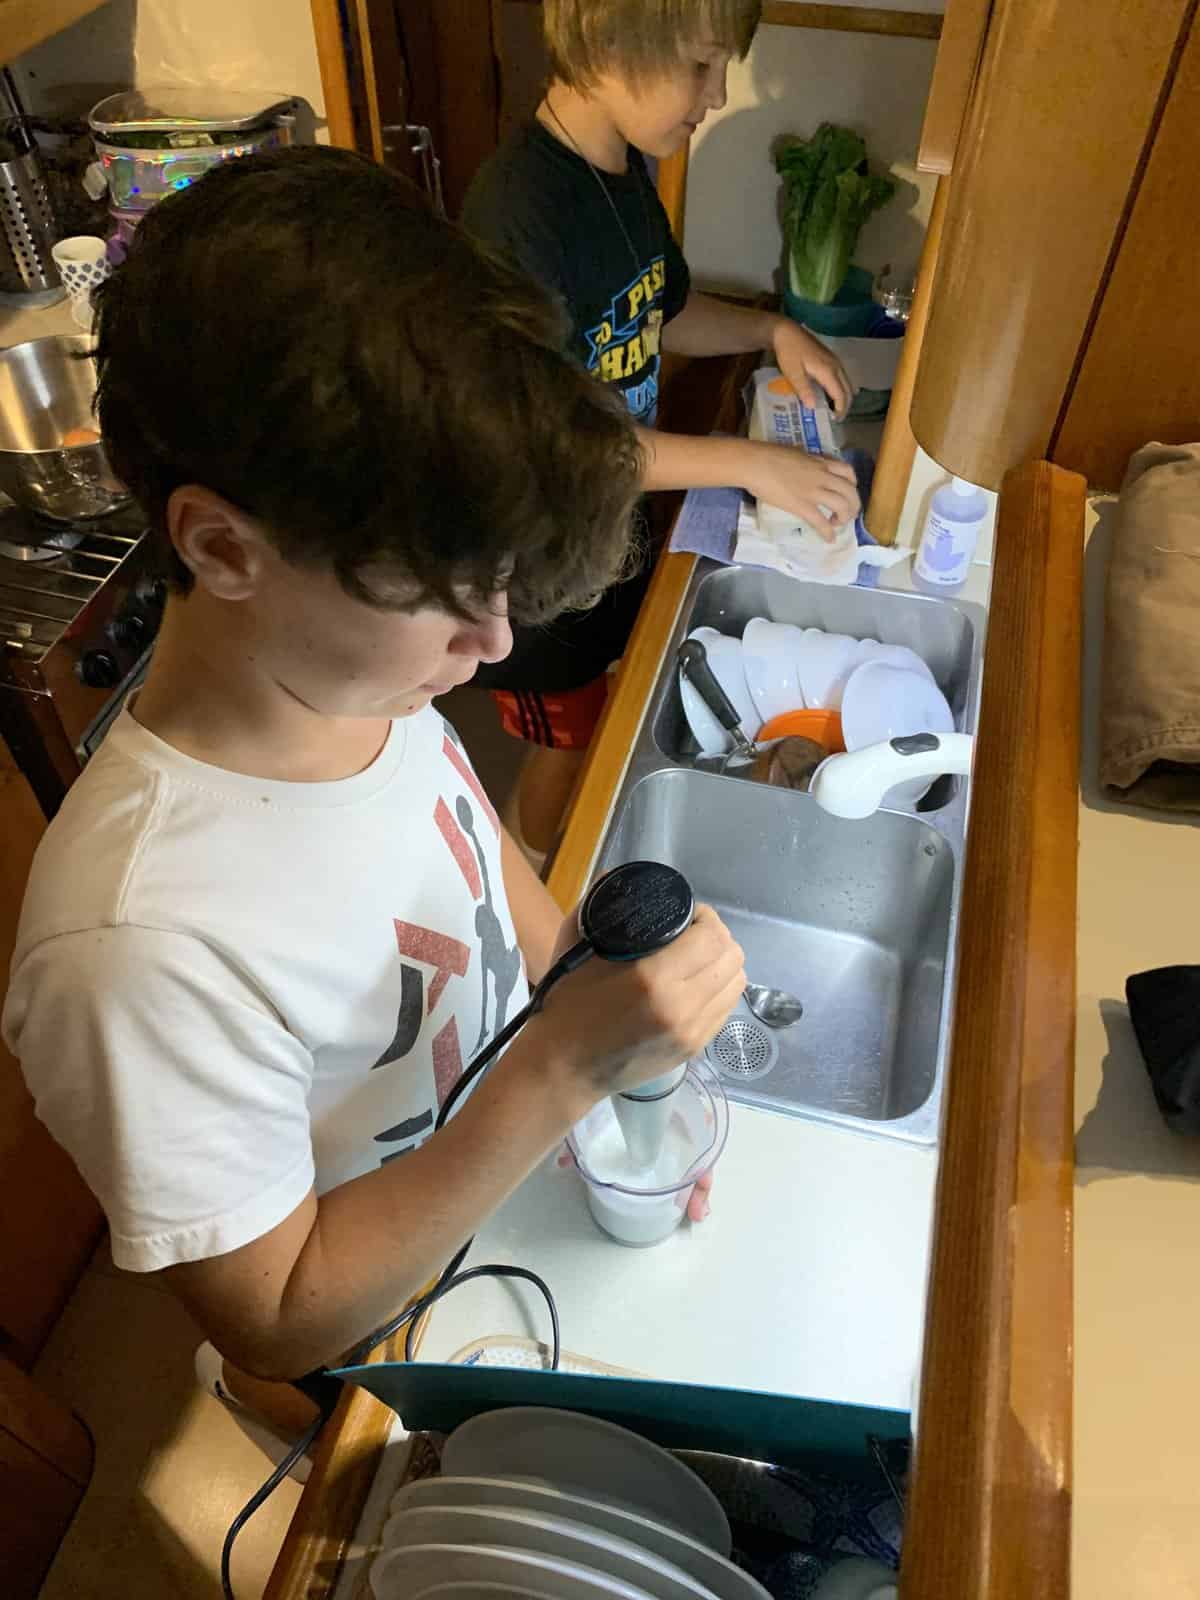 a boy using a hand-held blender to cook aboard a boat